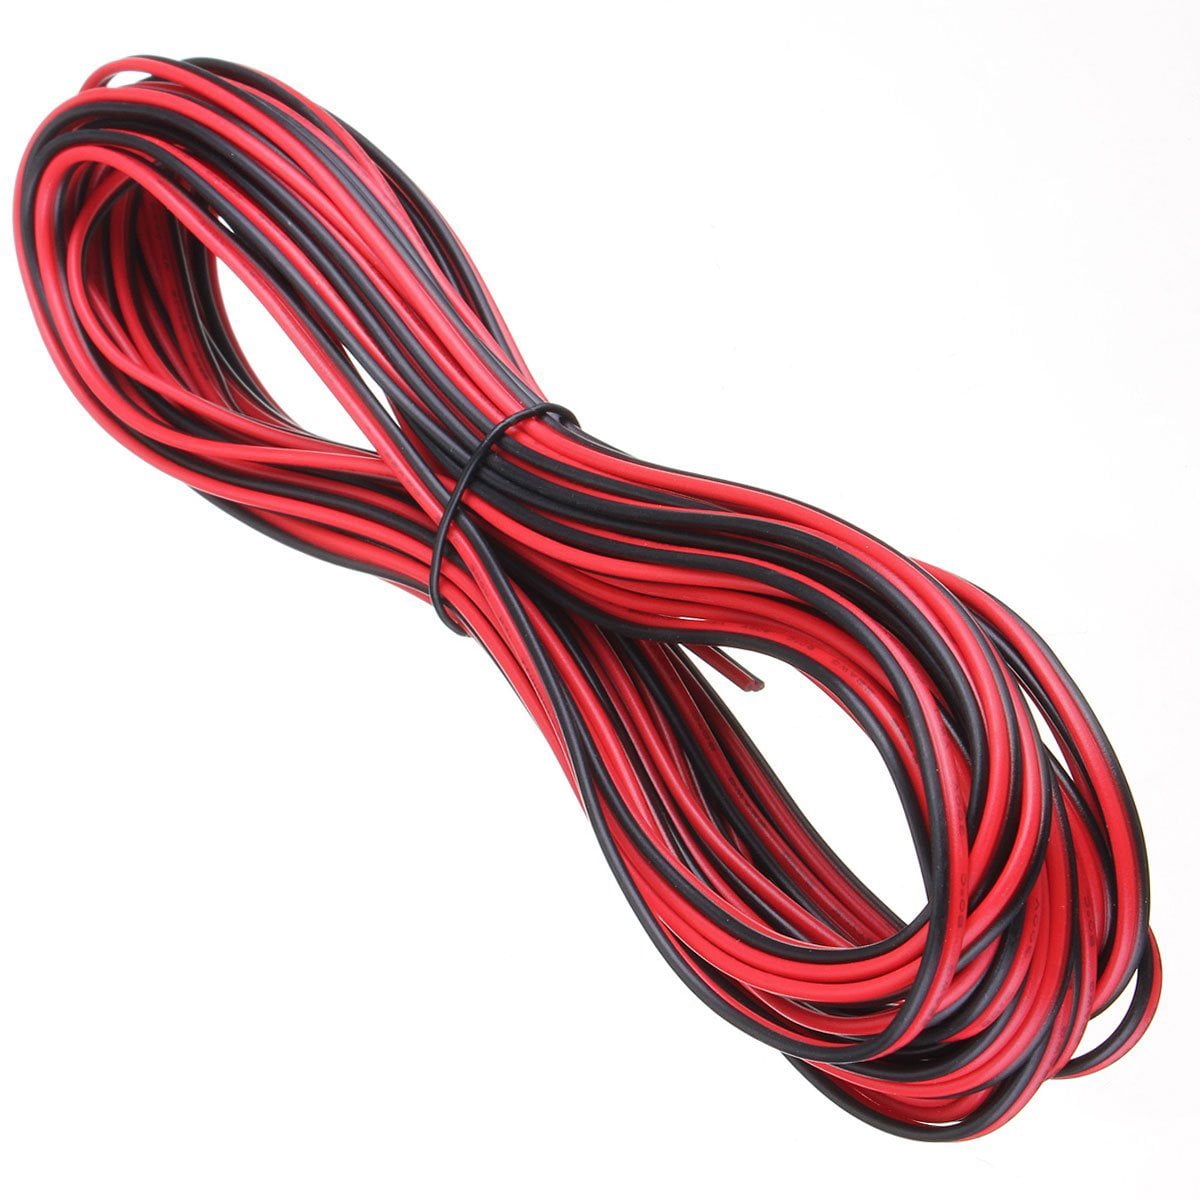 2Pin Extension Red Black Wire Cable Cord for 3528 5050 5630 LED Strip Lamp 22AWG 